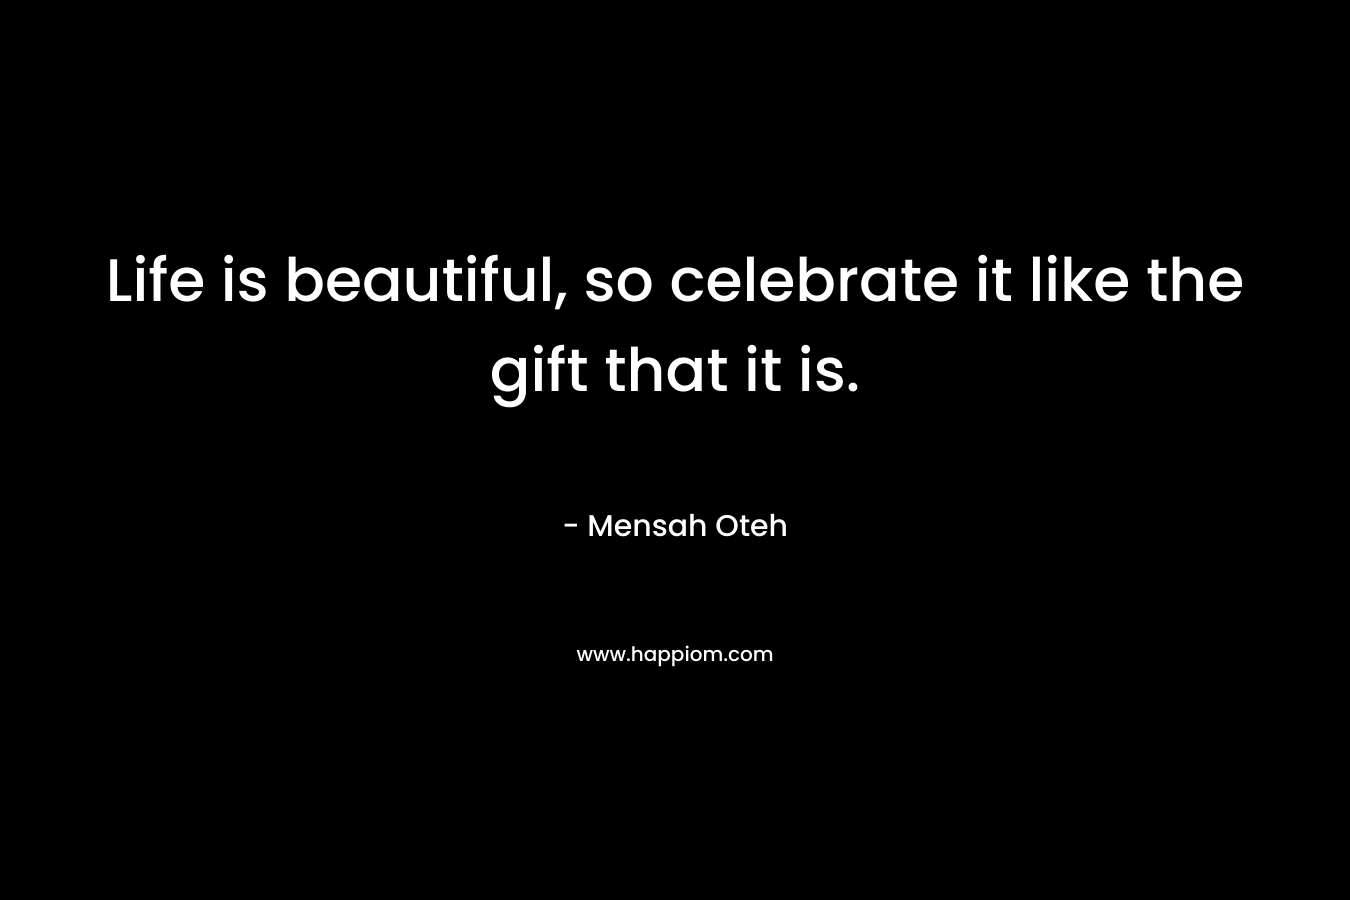 Life is beautiful, so celebrate it like the gift that it is.